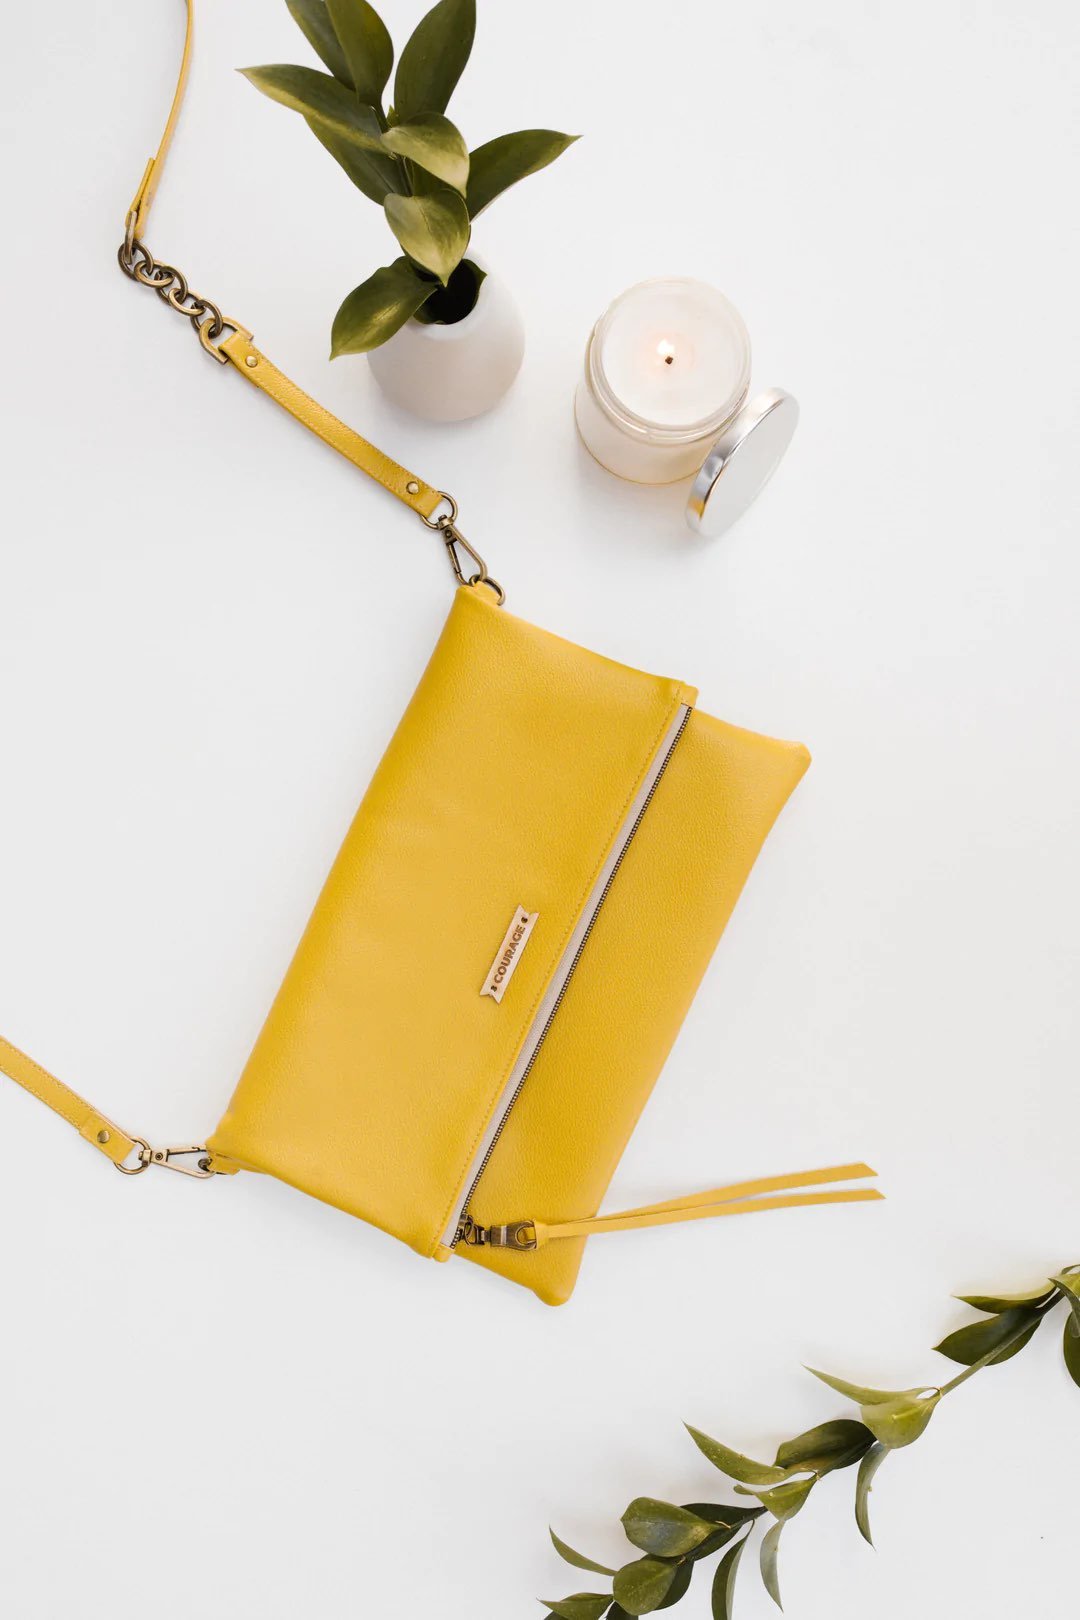 Hjælp næve leninismen 15 Sustainable Fashion Accessories for Summer — The Honest Consumer